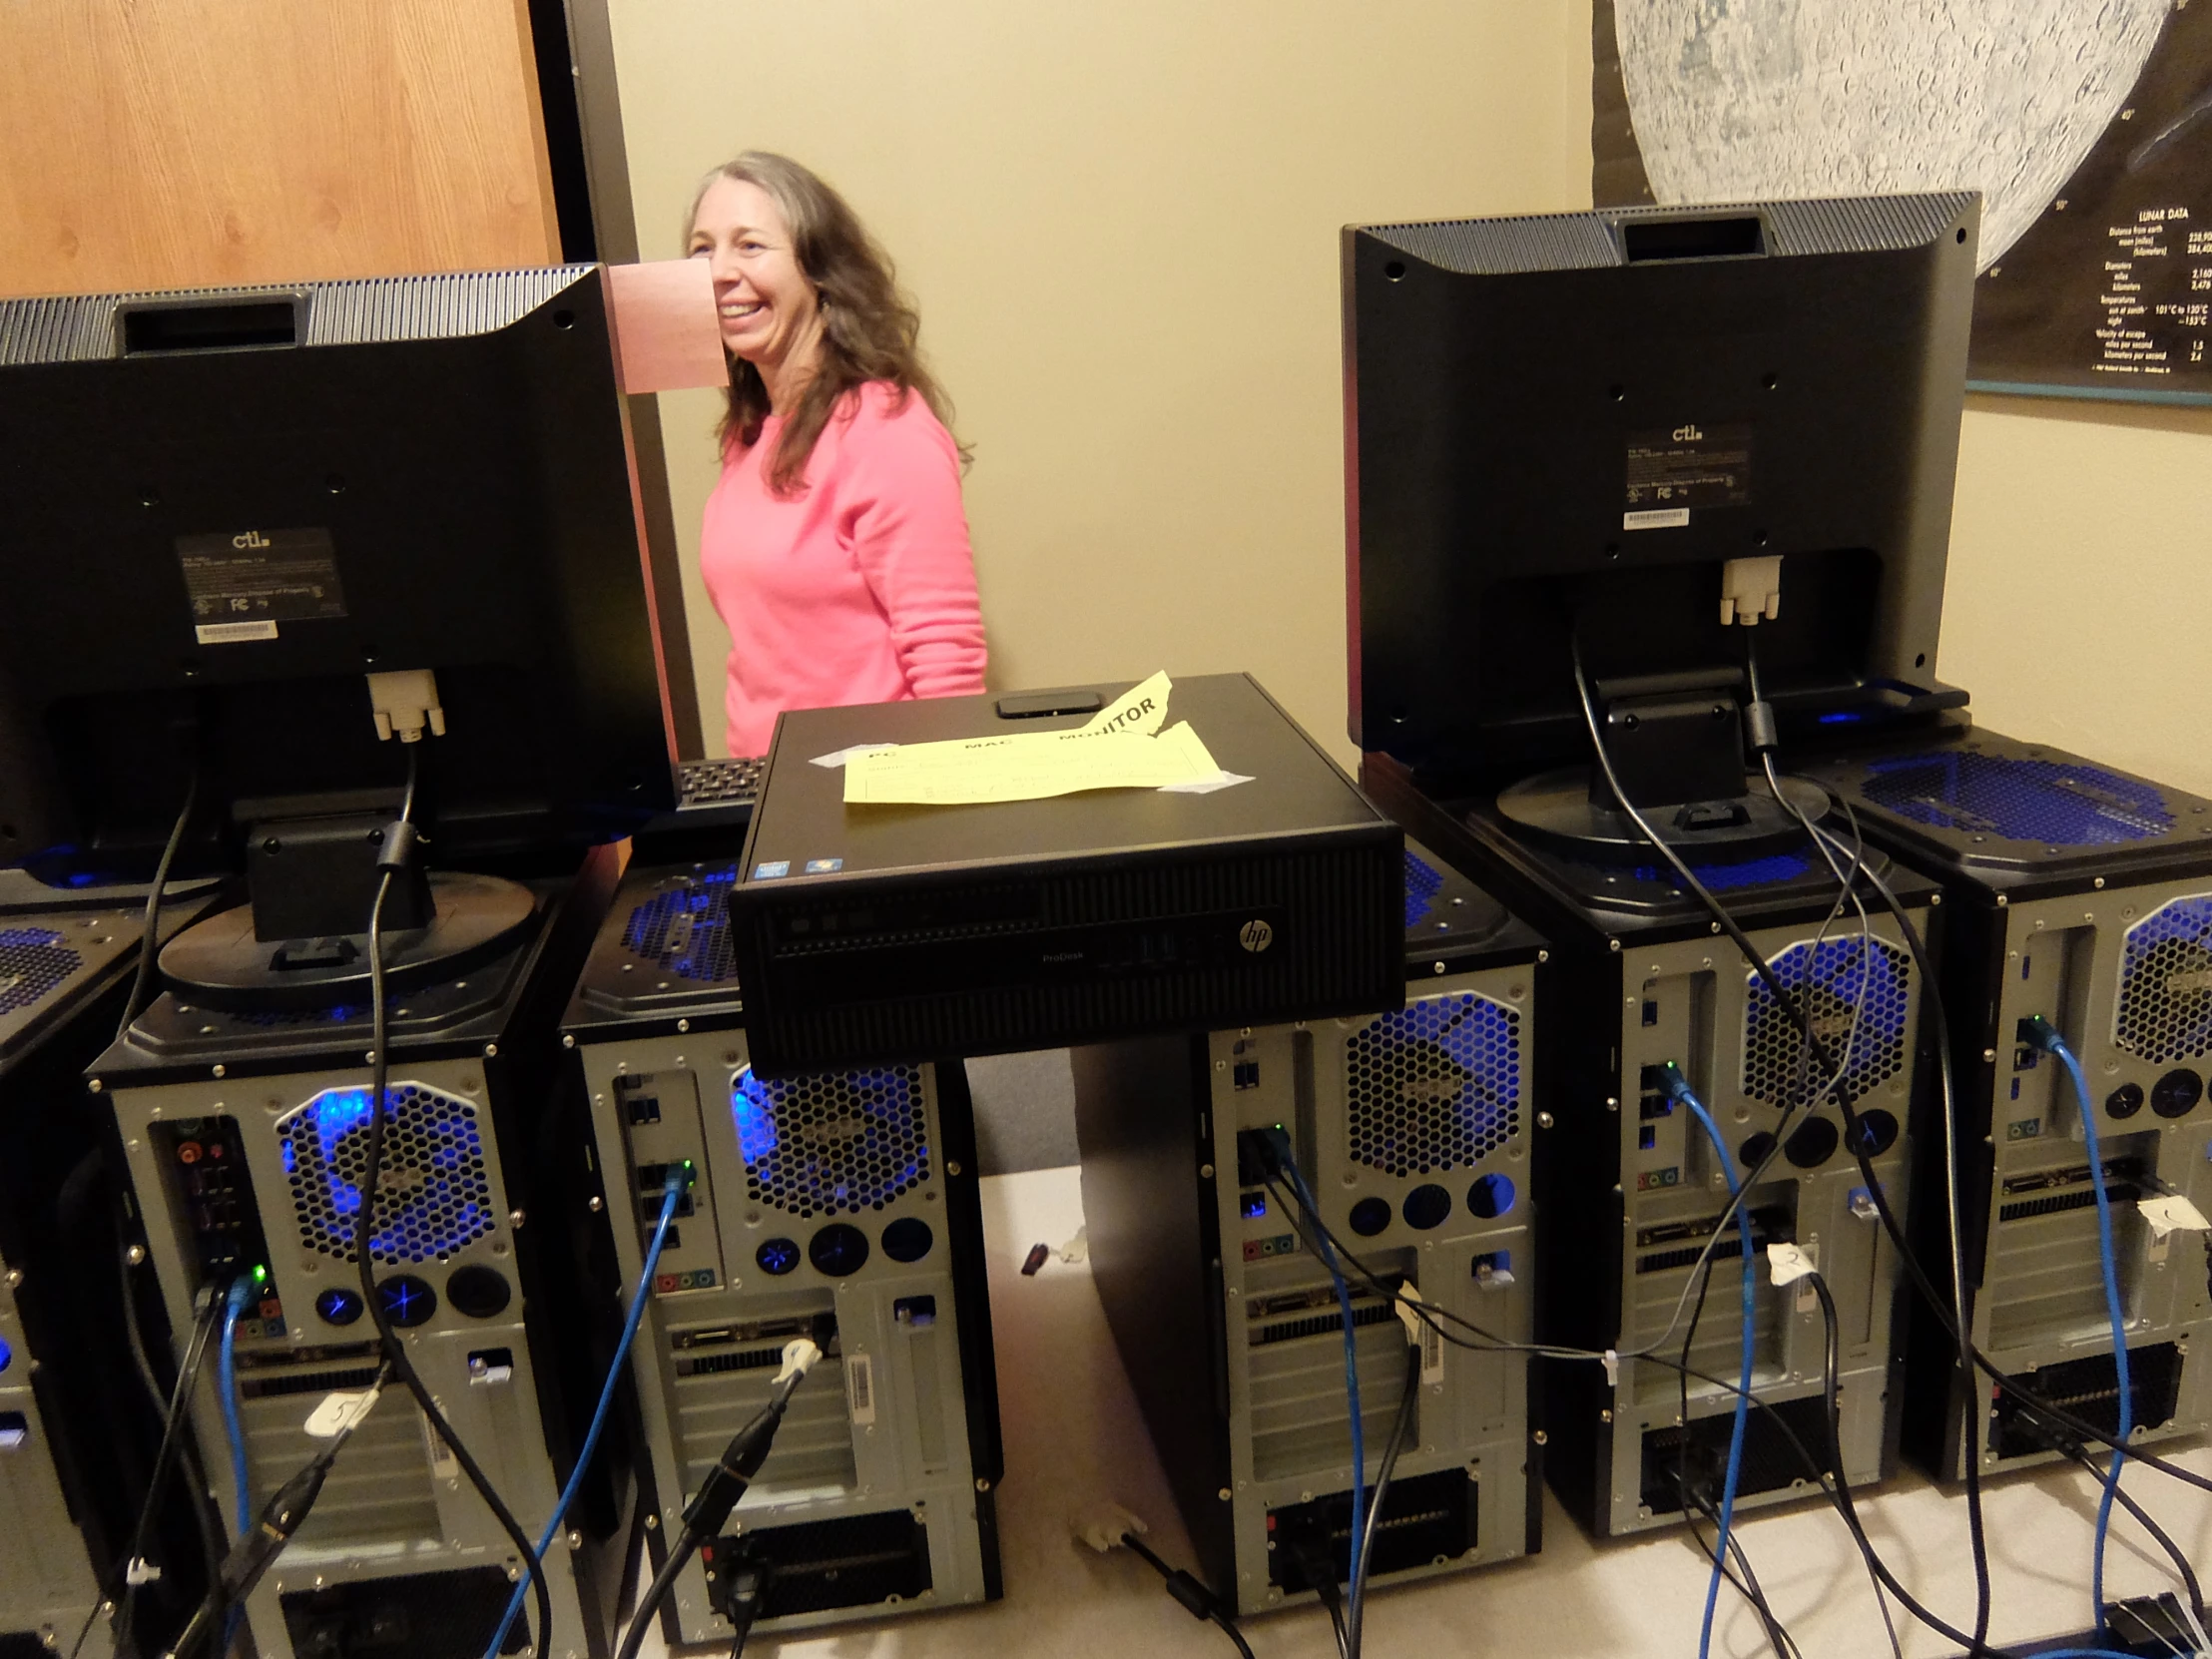 a woman standing behind a large number of computers